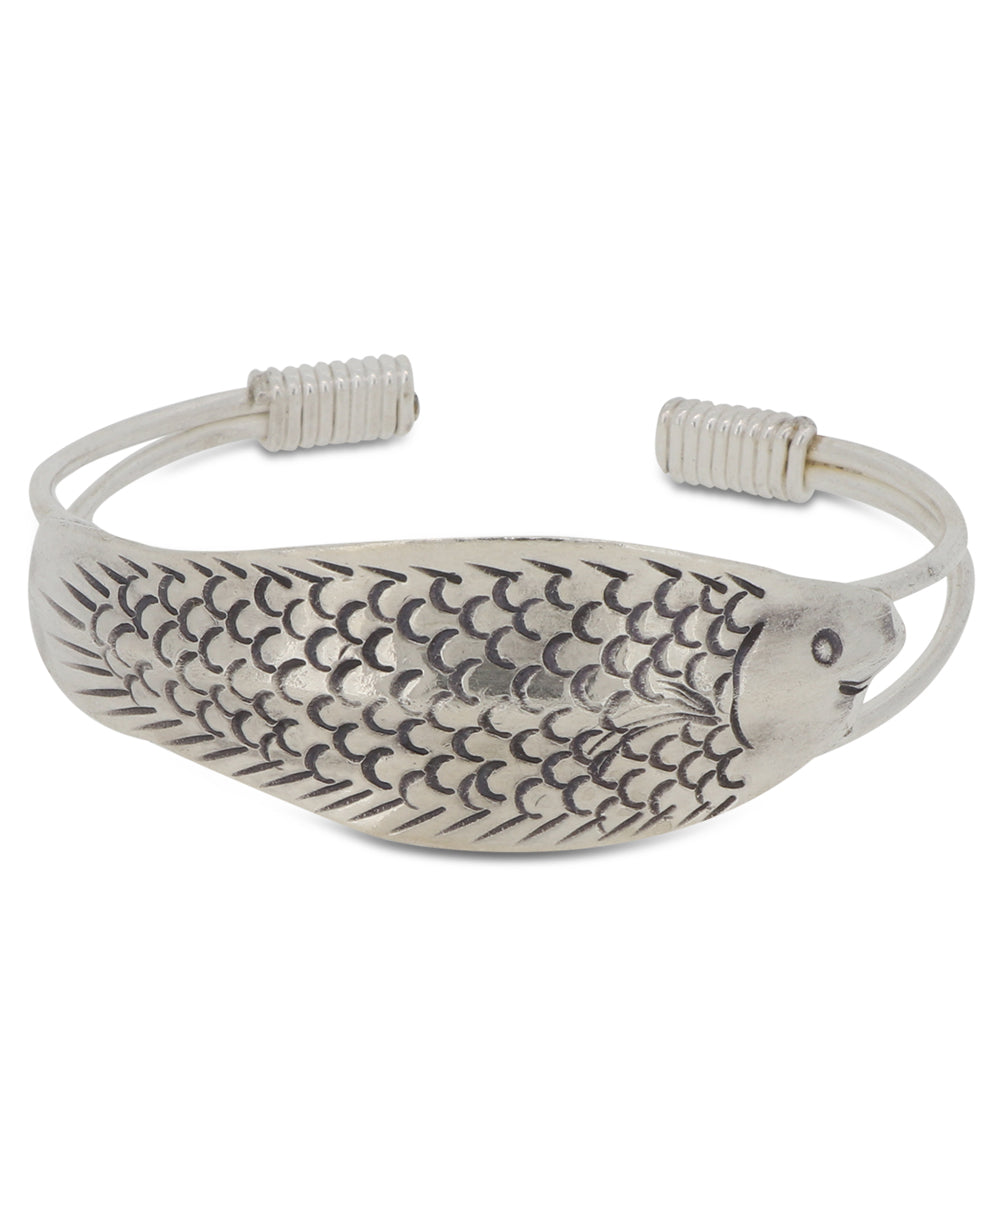 Handcrafted Thai Hilltribe Silver Fish Bracelet